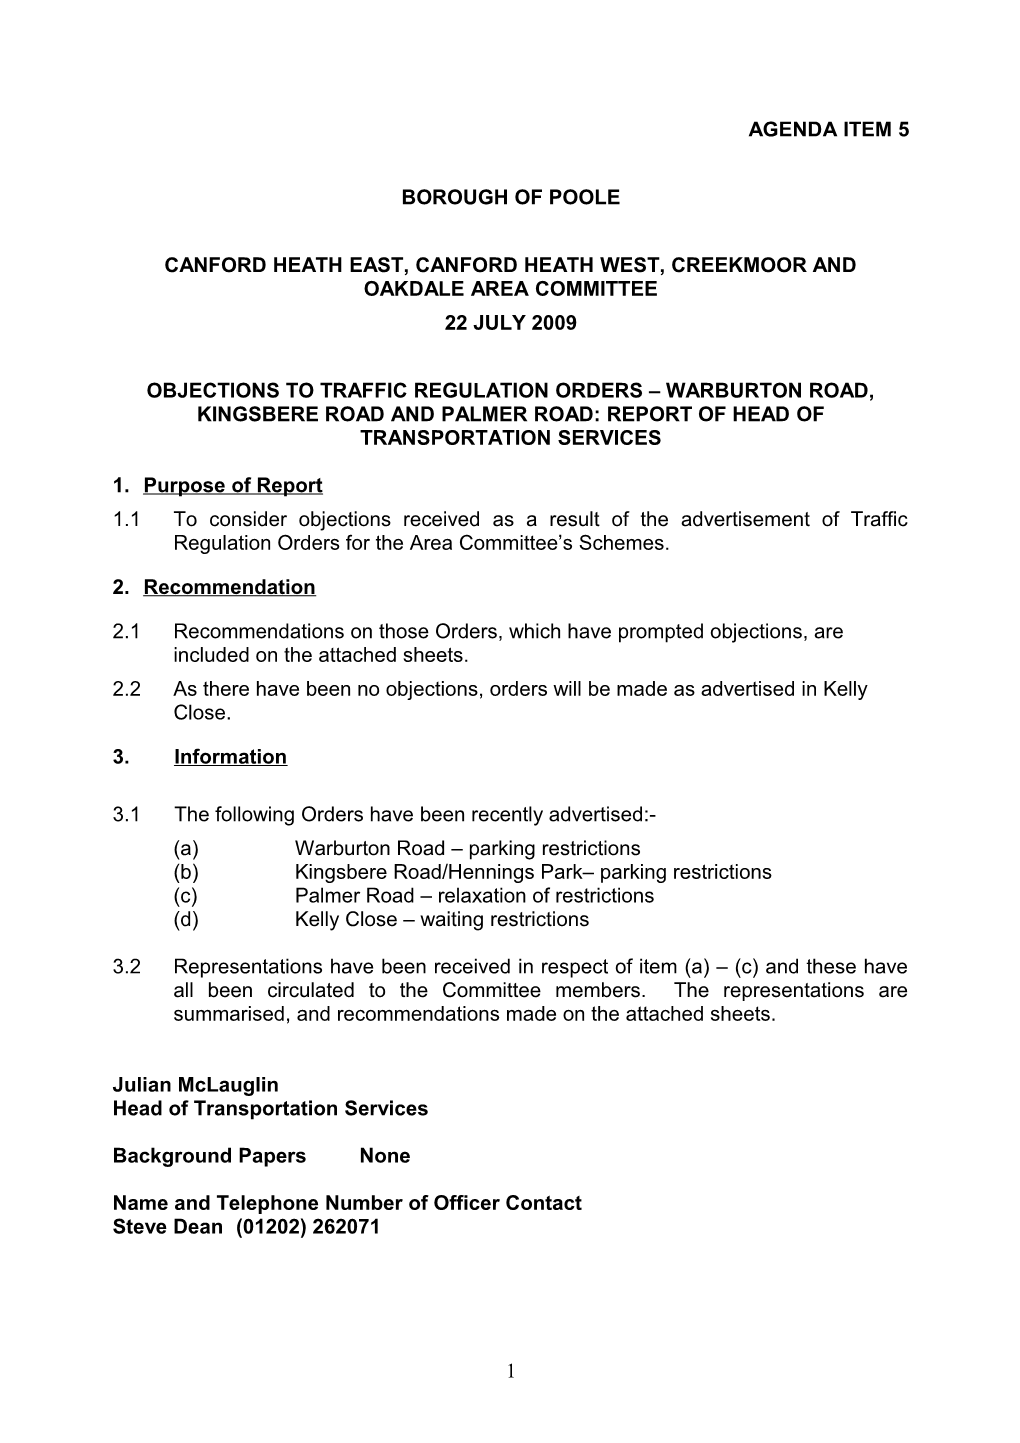 Objections to Traffic Regulation Orders Warburton Road, Kingsbere Road and Palmer Road